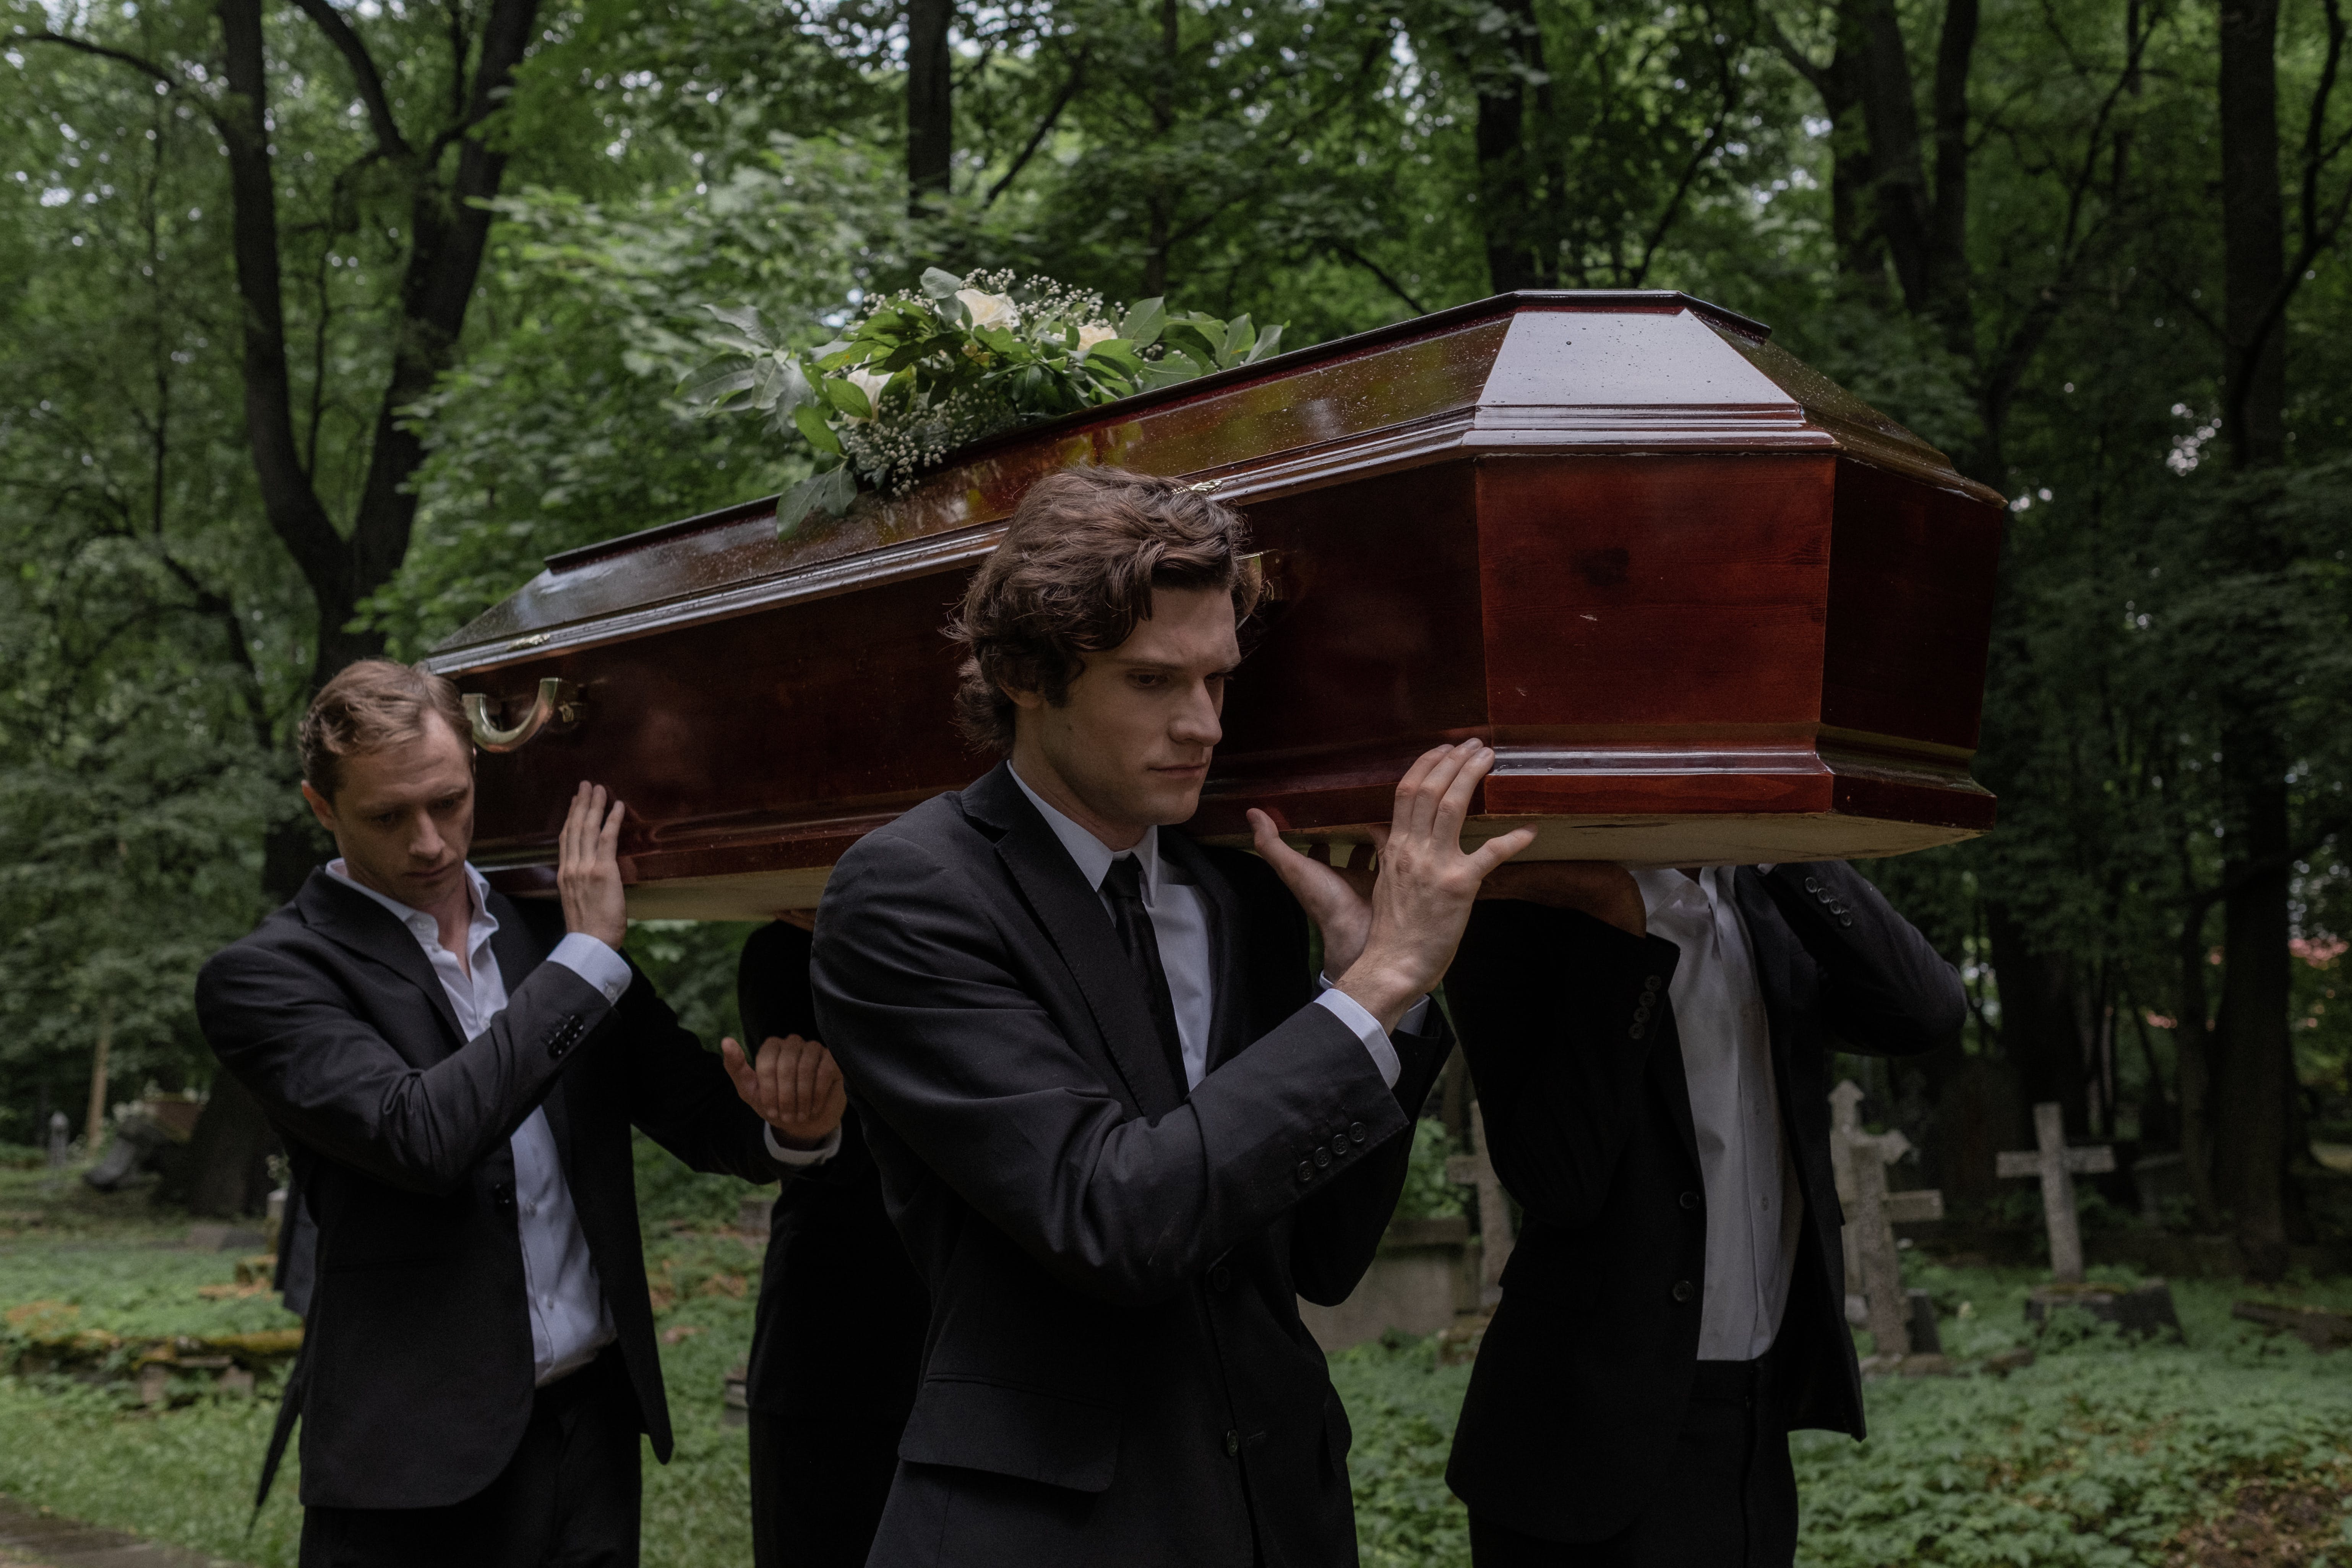 People carrying a coffin. | Source: Pexels